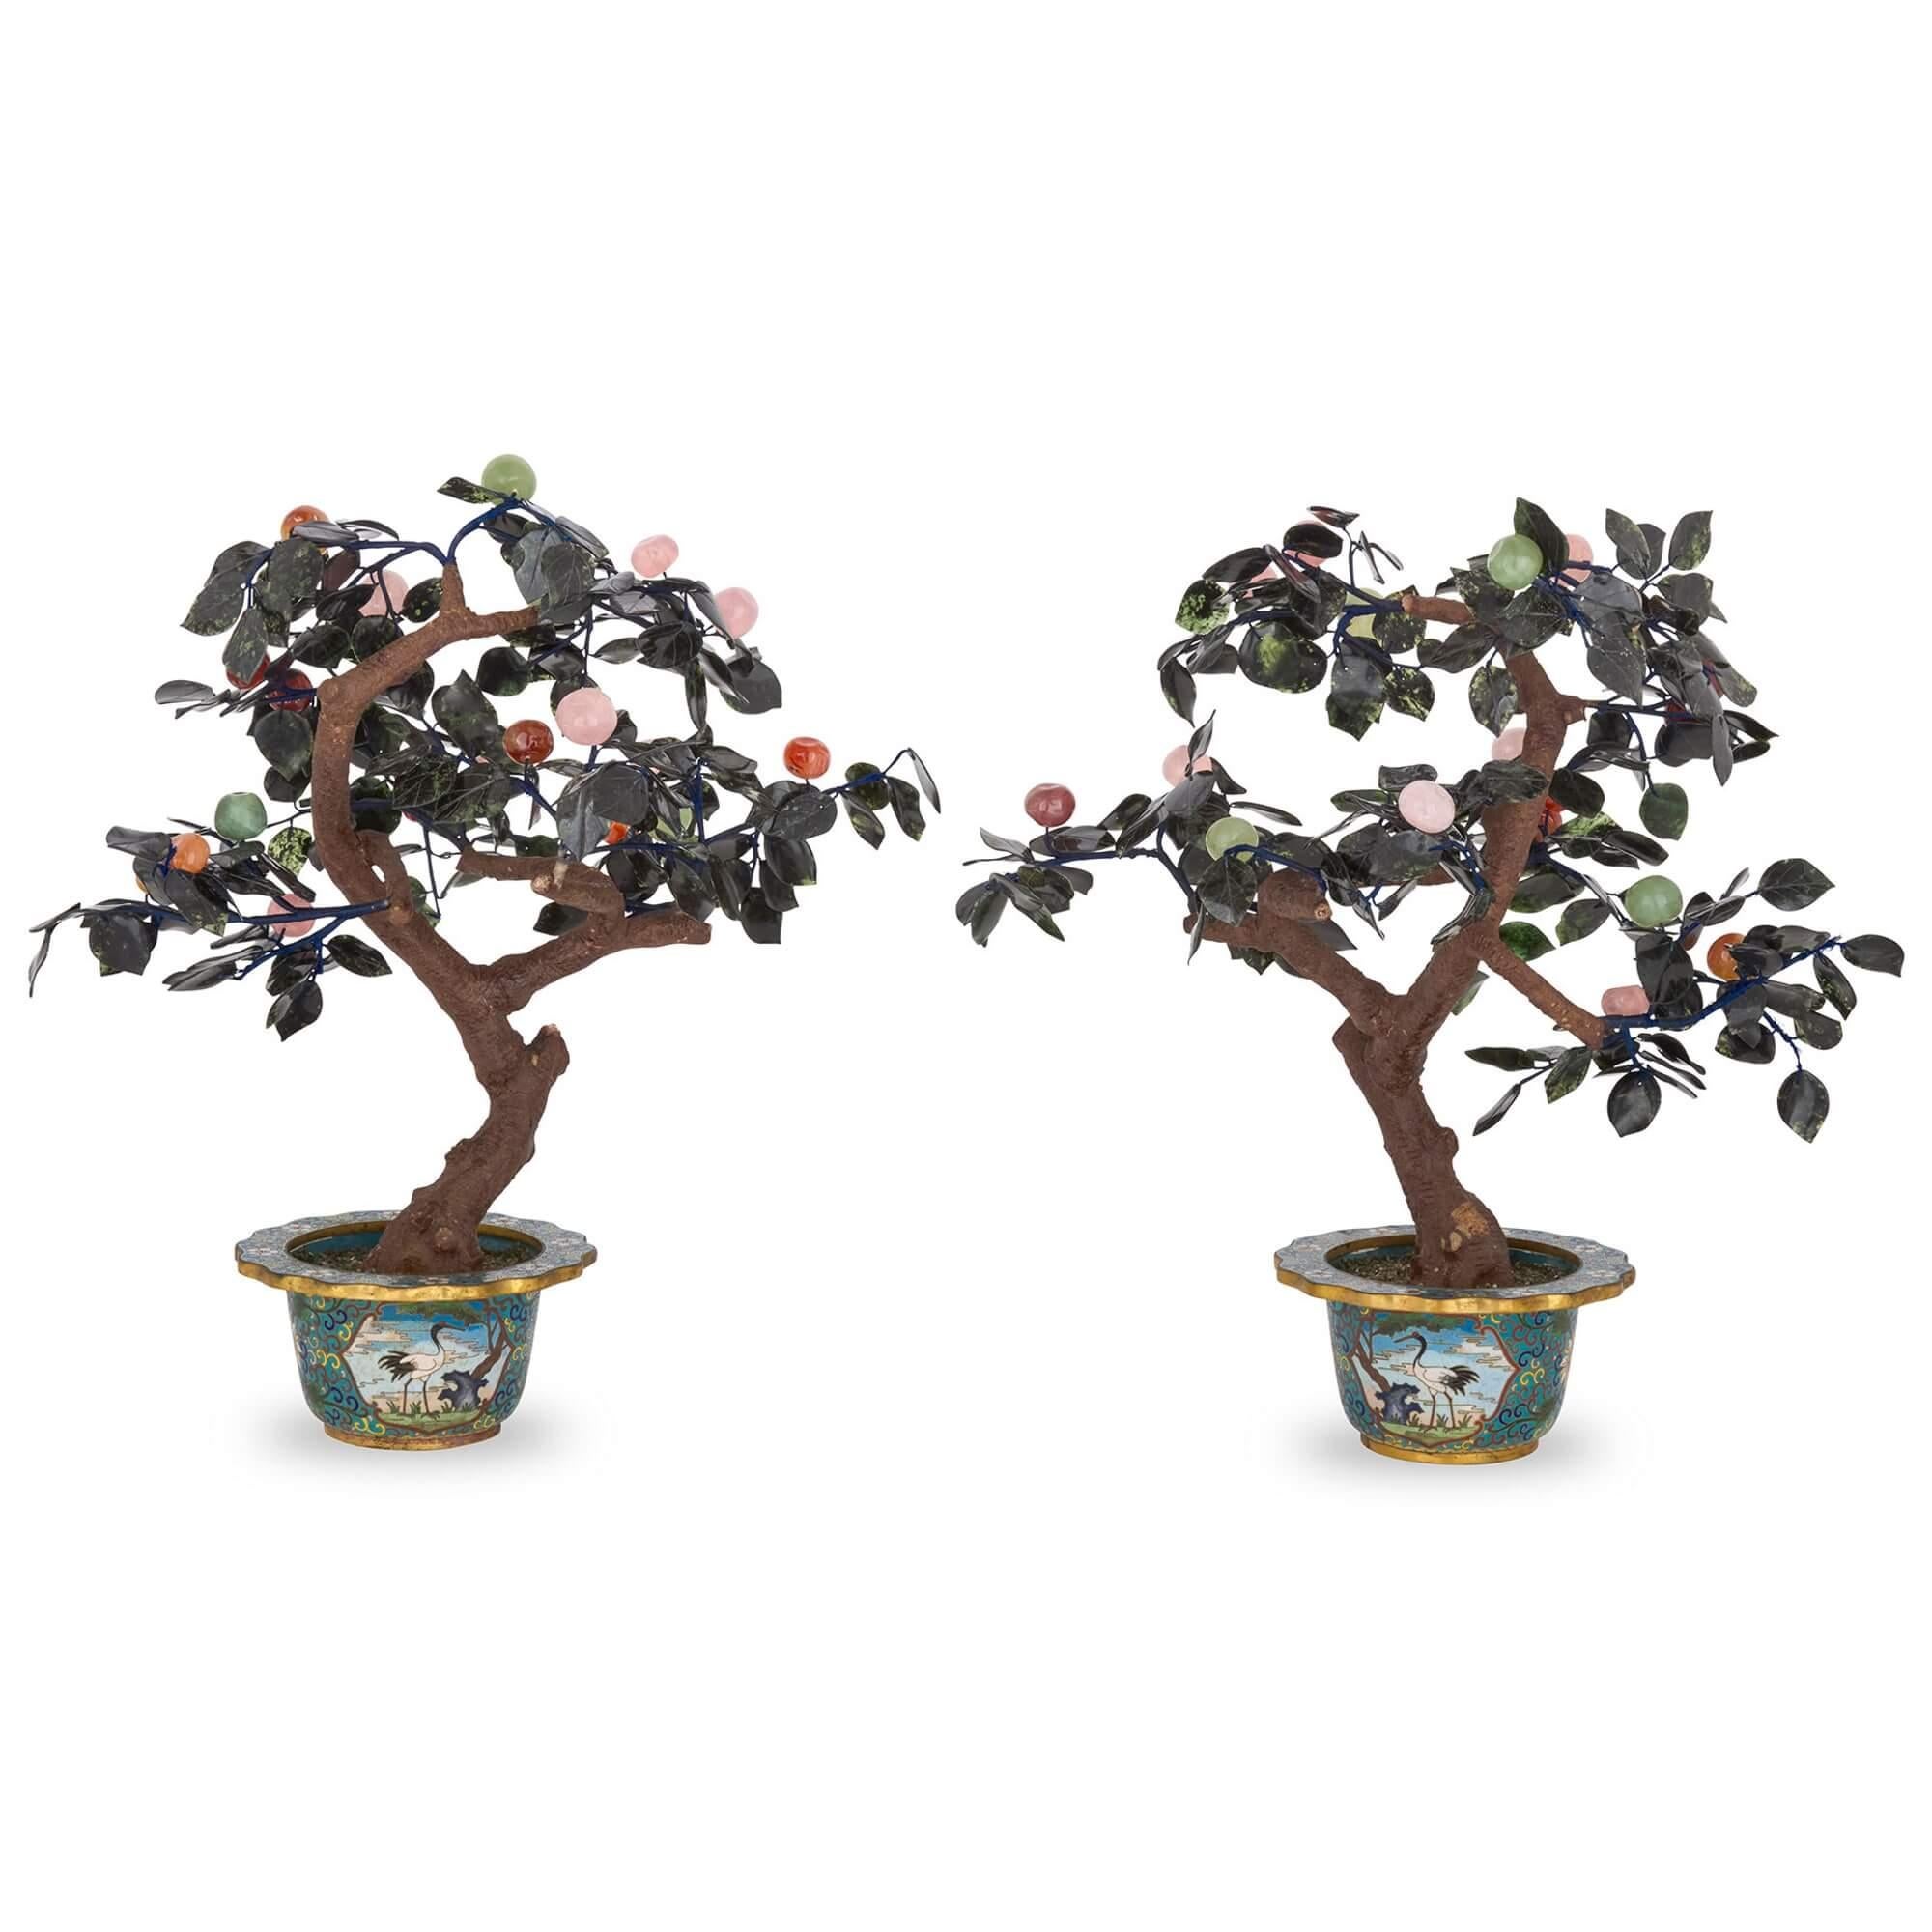 Pair of Chinese hardstone and cloisonné enamel flower models
Chinese, 20th Century 
Height 52cm, width 46cm, depth 36cm

These two superb flower models are almost identical in design. Each comprises a metal tree decorated with hardstone leaves and